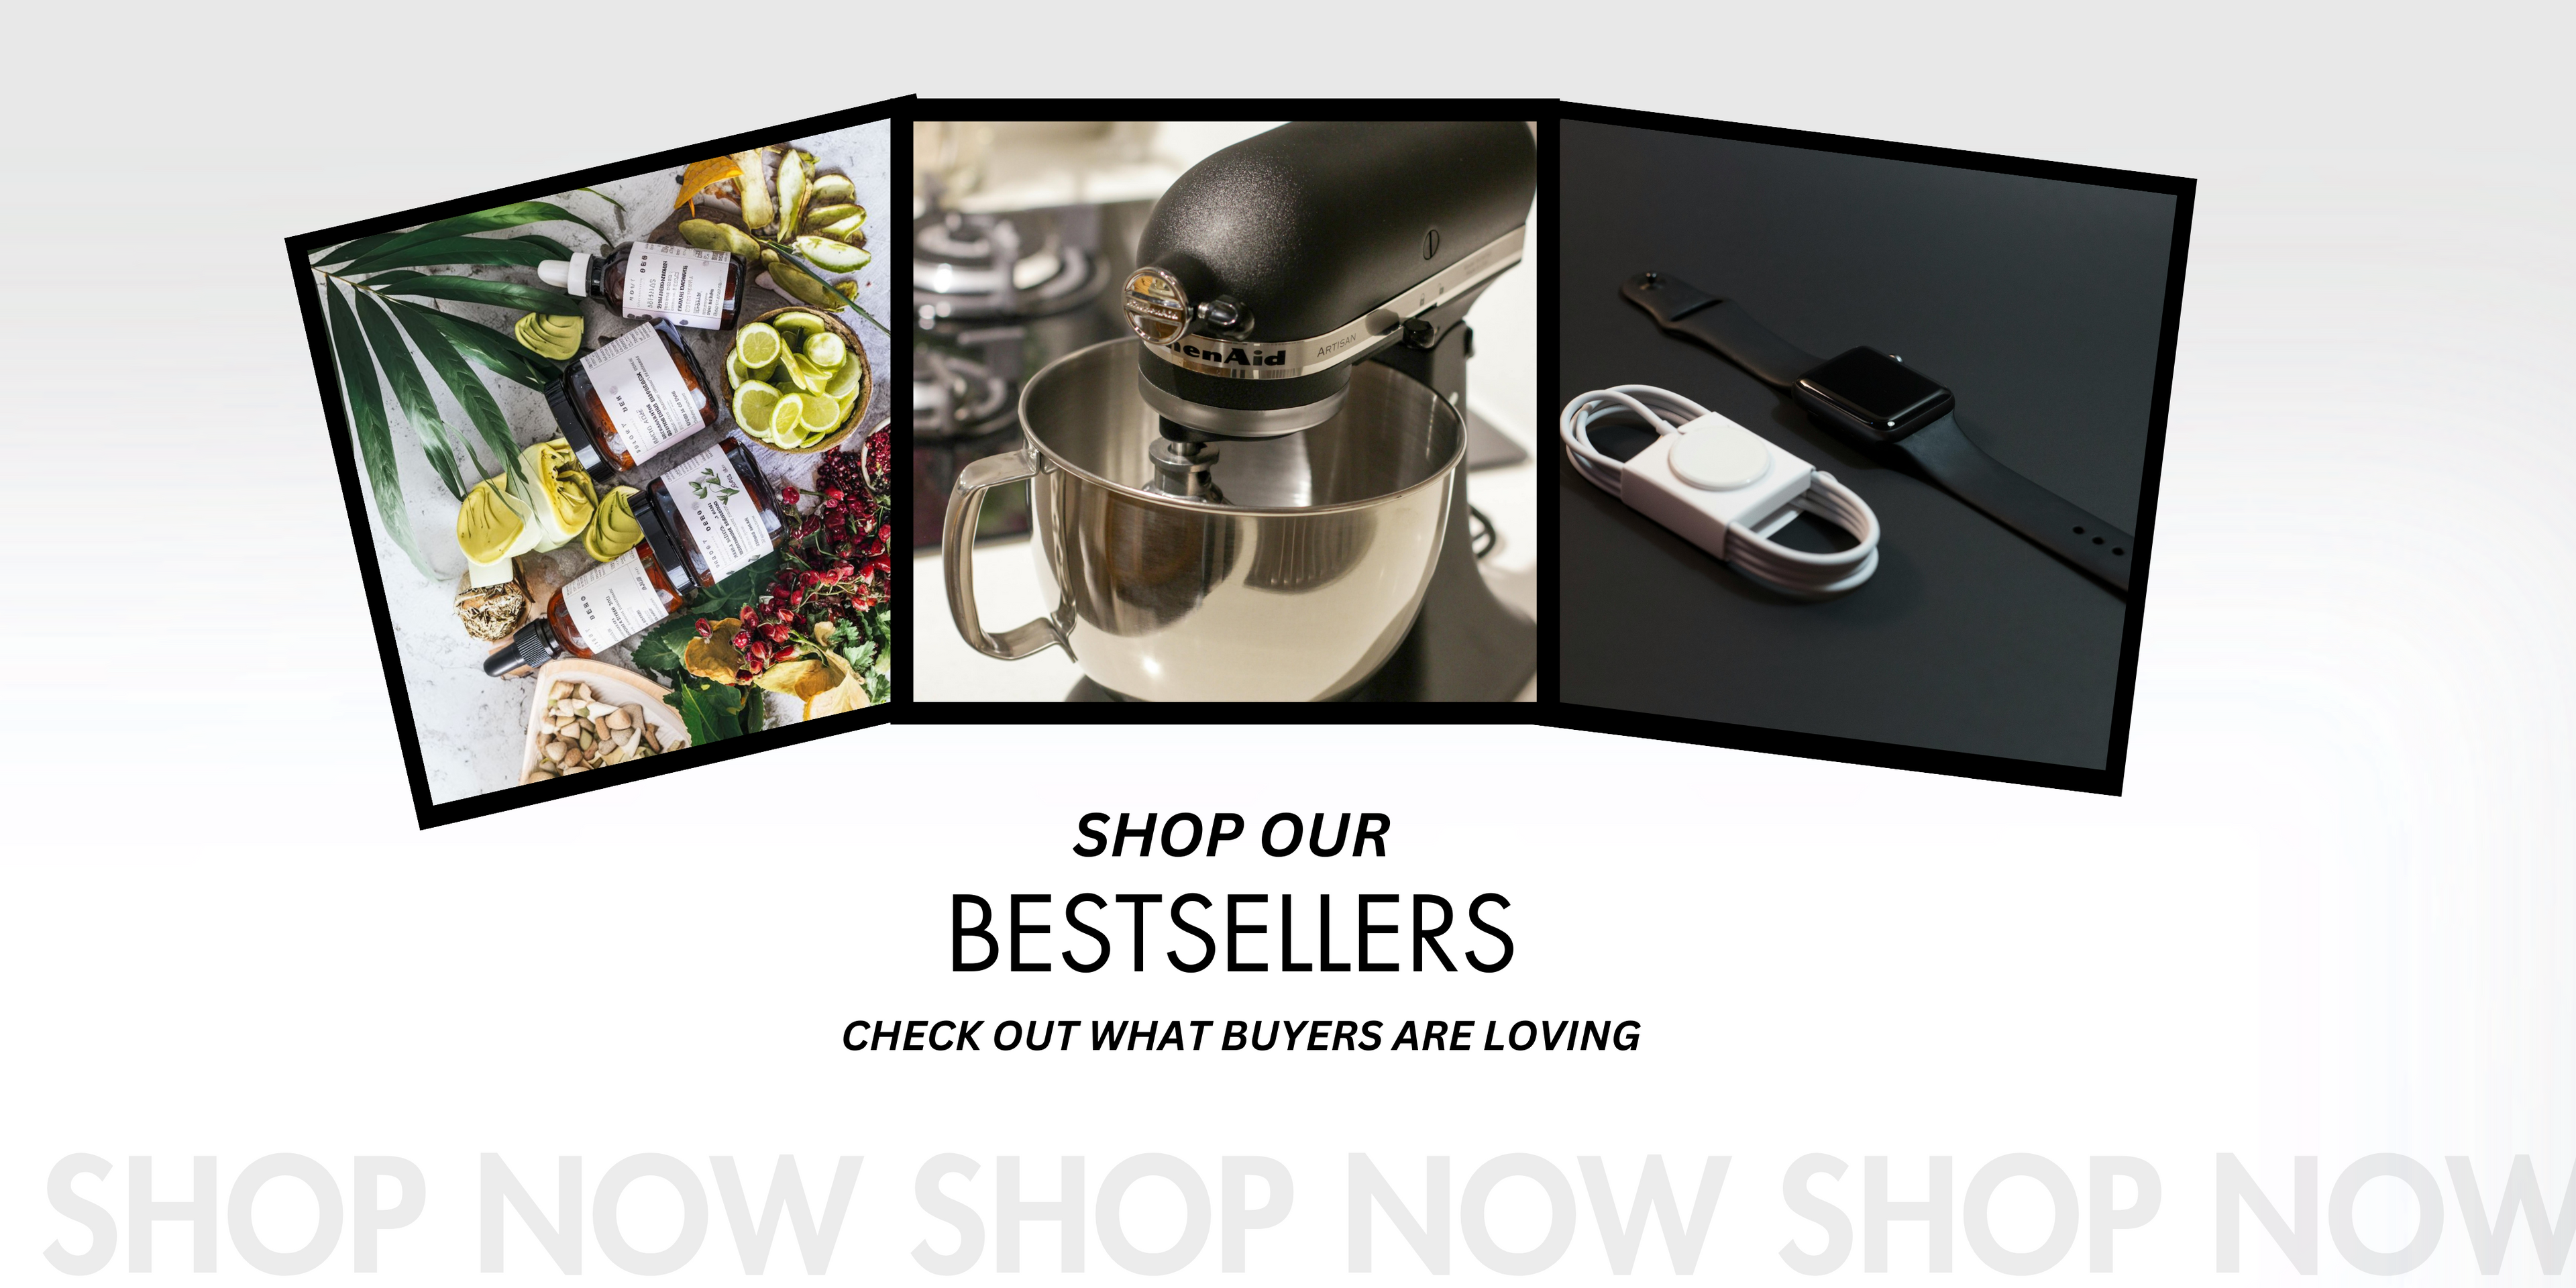 kitchen items, smart watch, beauty products